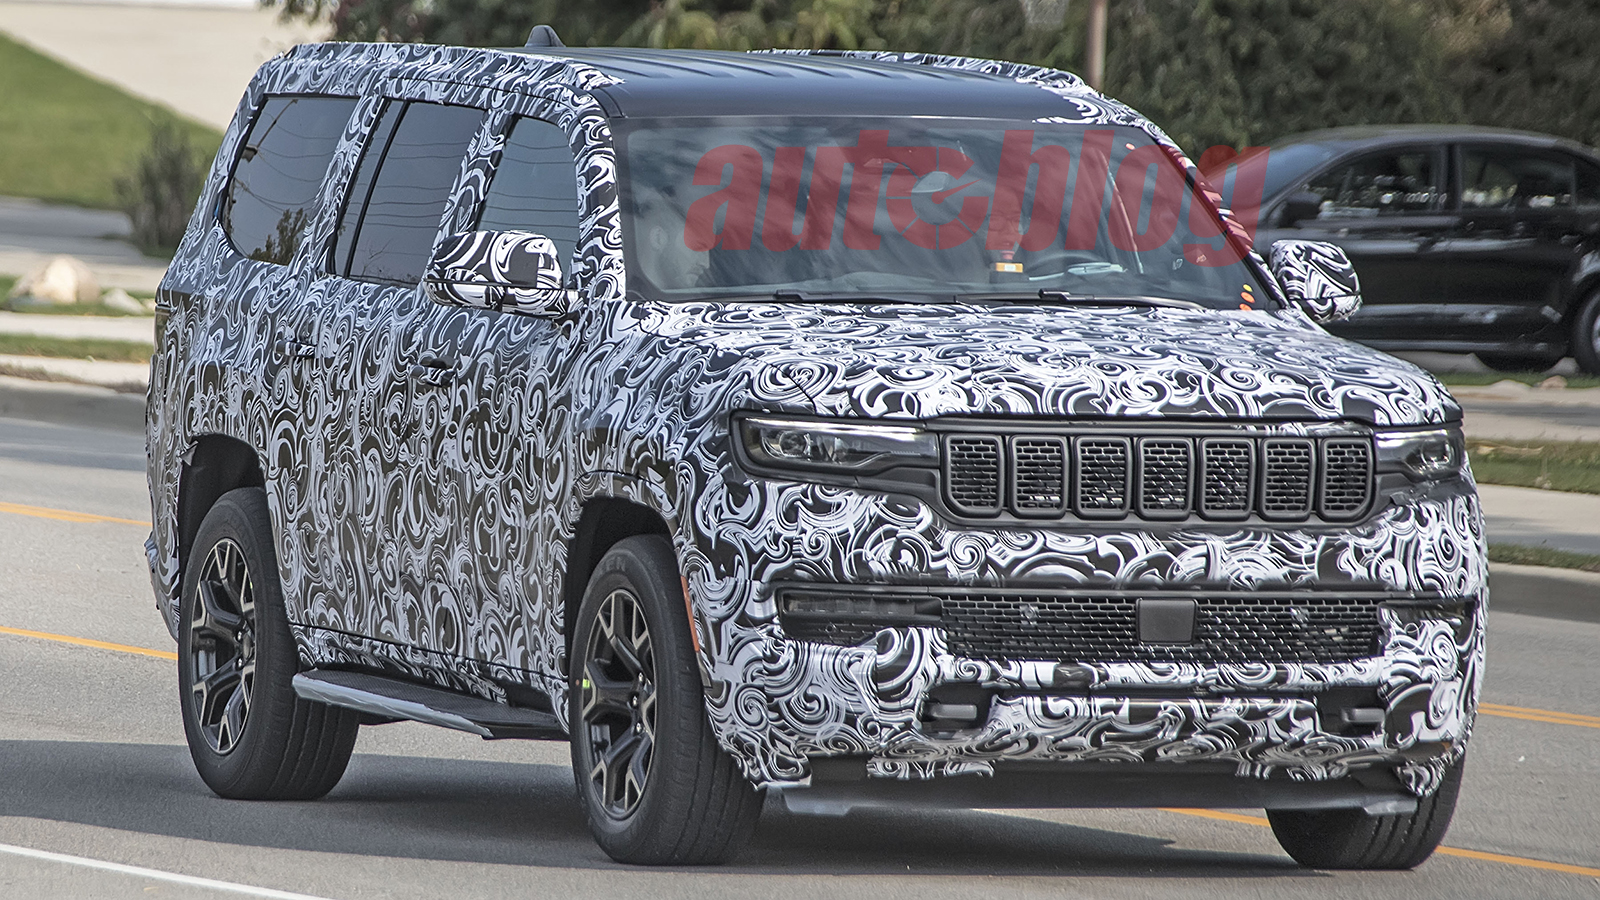 2022 Jeep Grand Wagoneer In Spy Photos Looks Like The Concept Autoblog